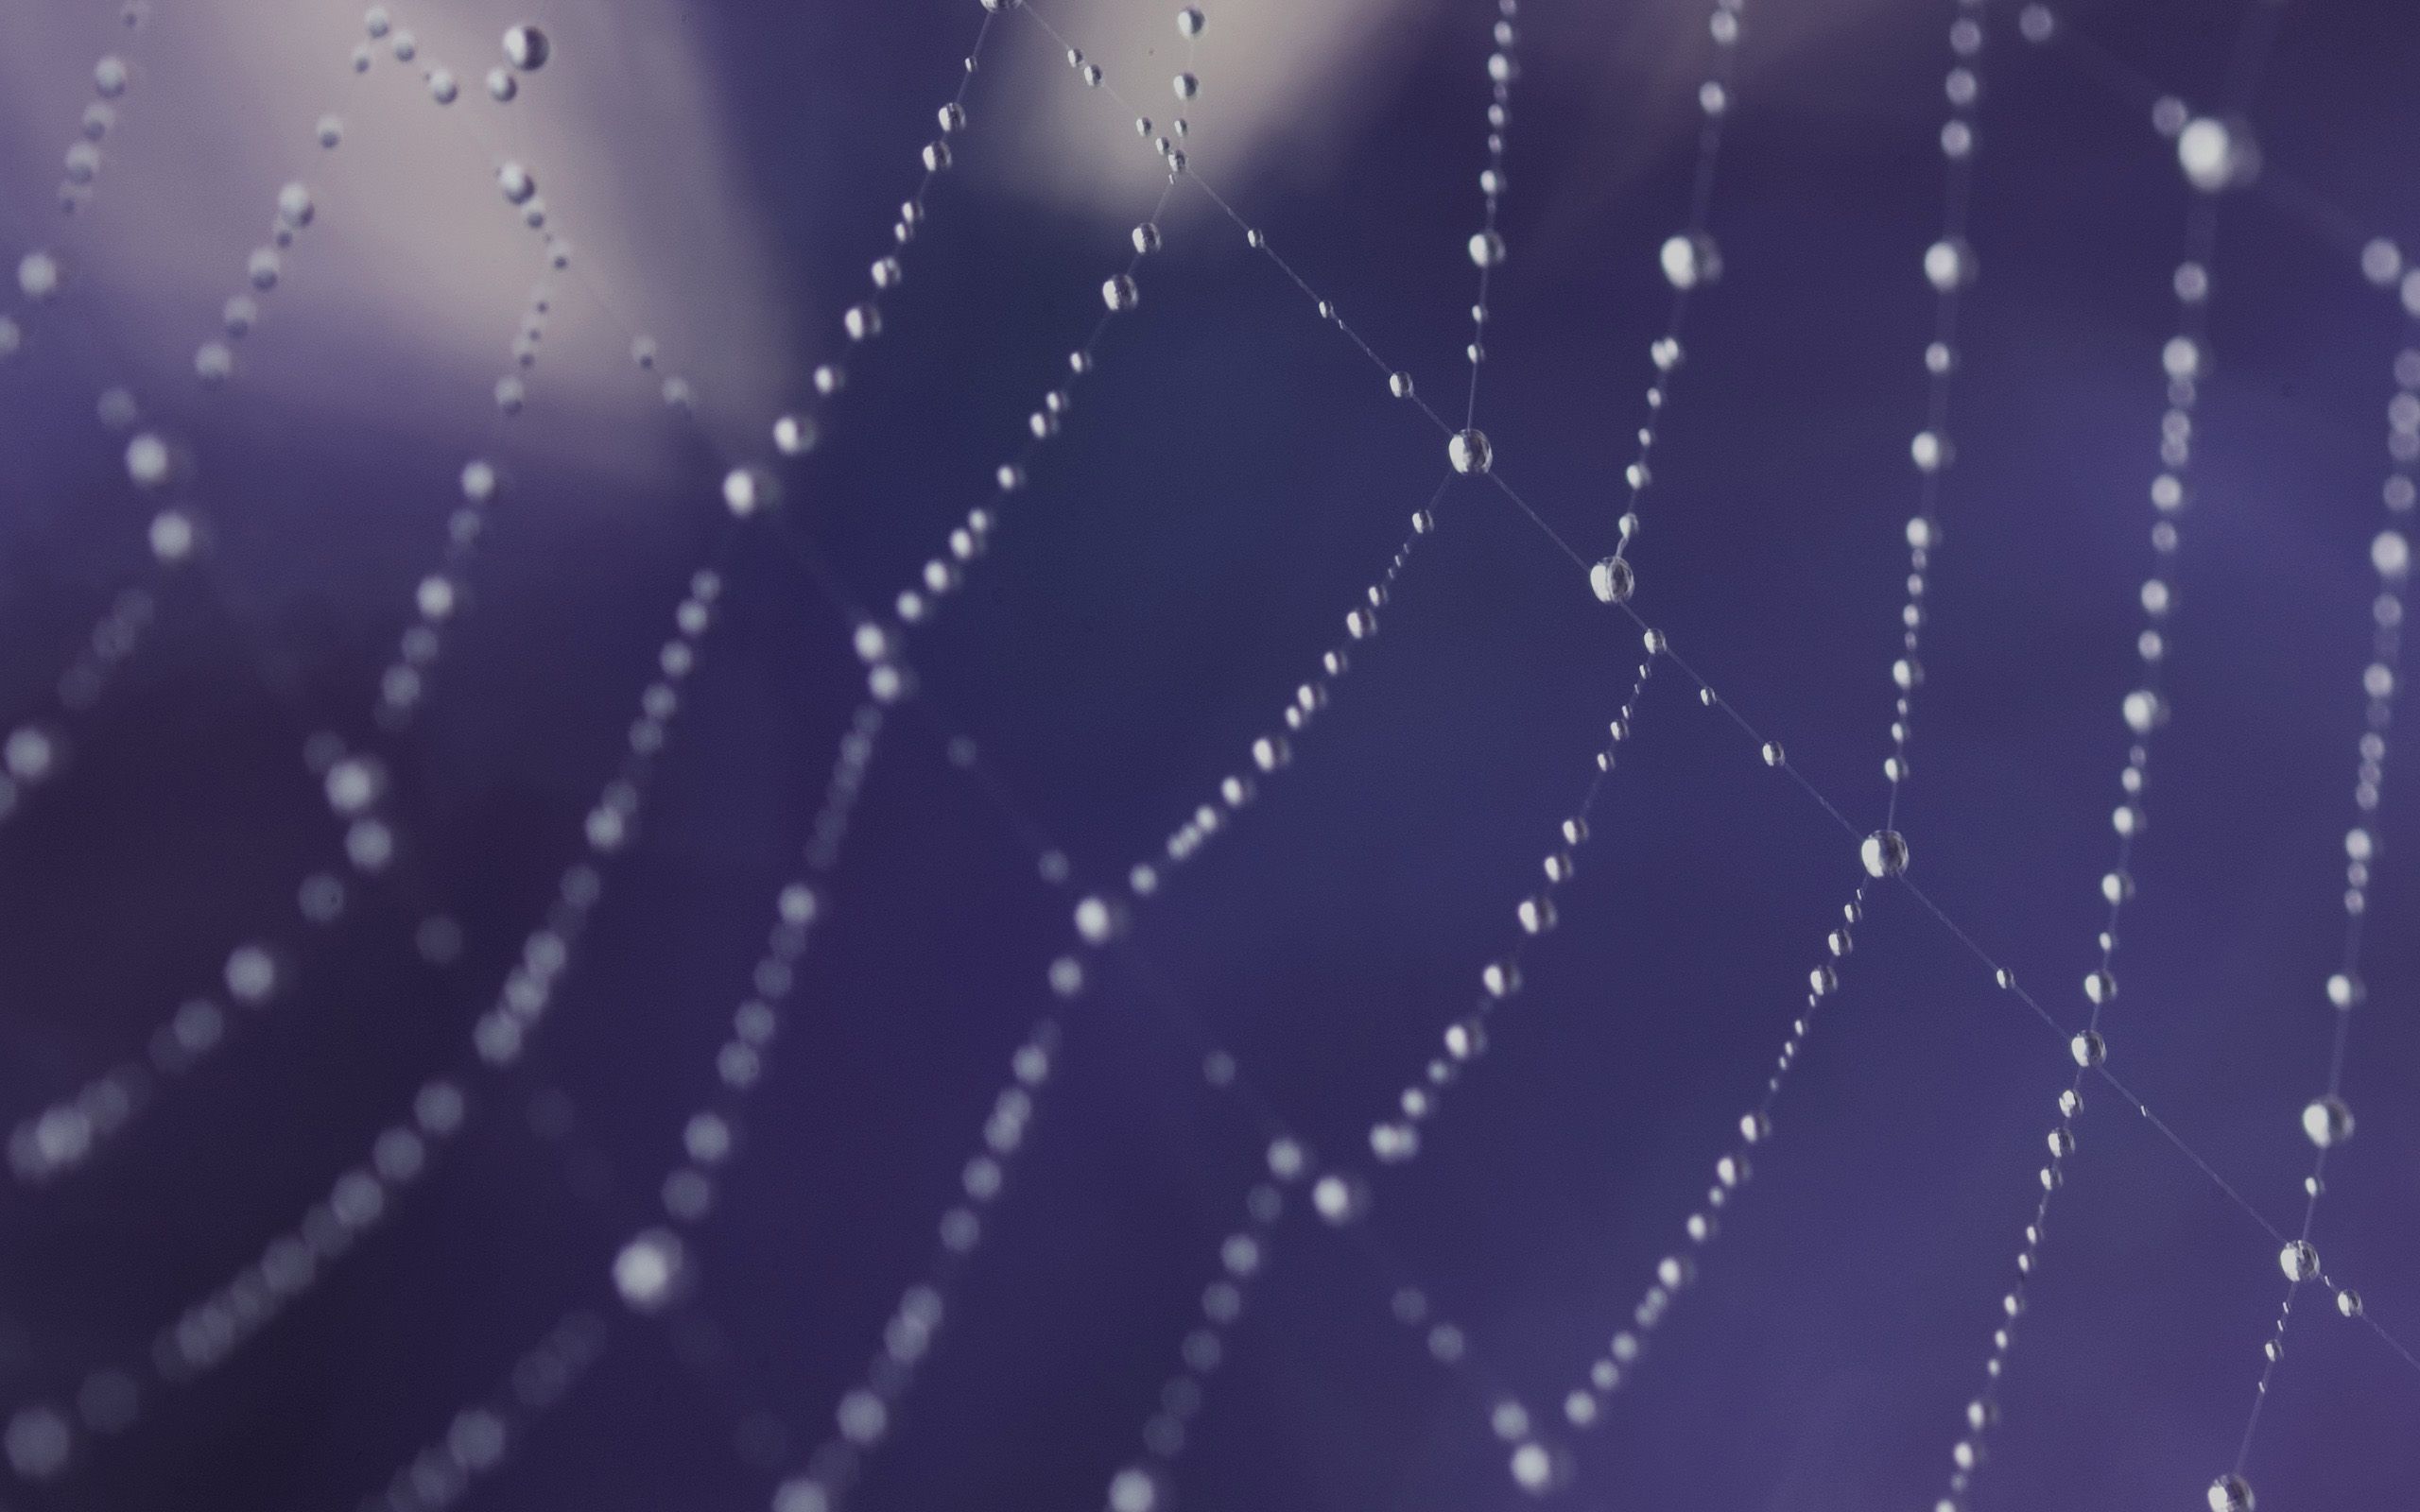 Spider webs wallpaper - (#170845) - High Quality and Resolution ...